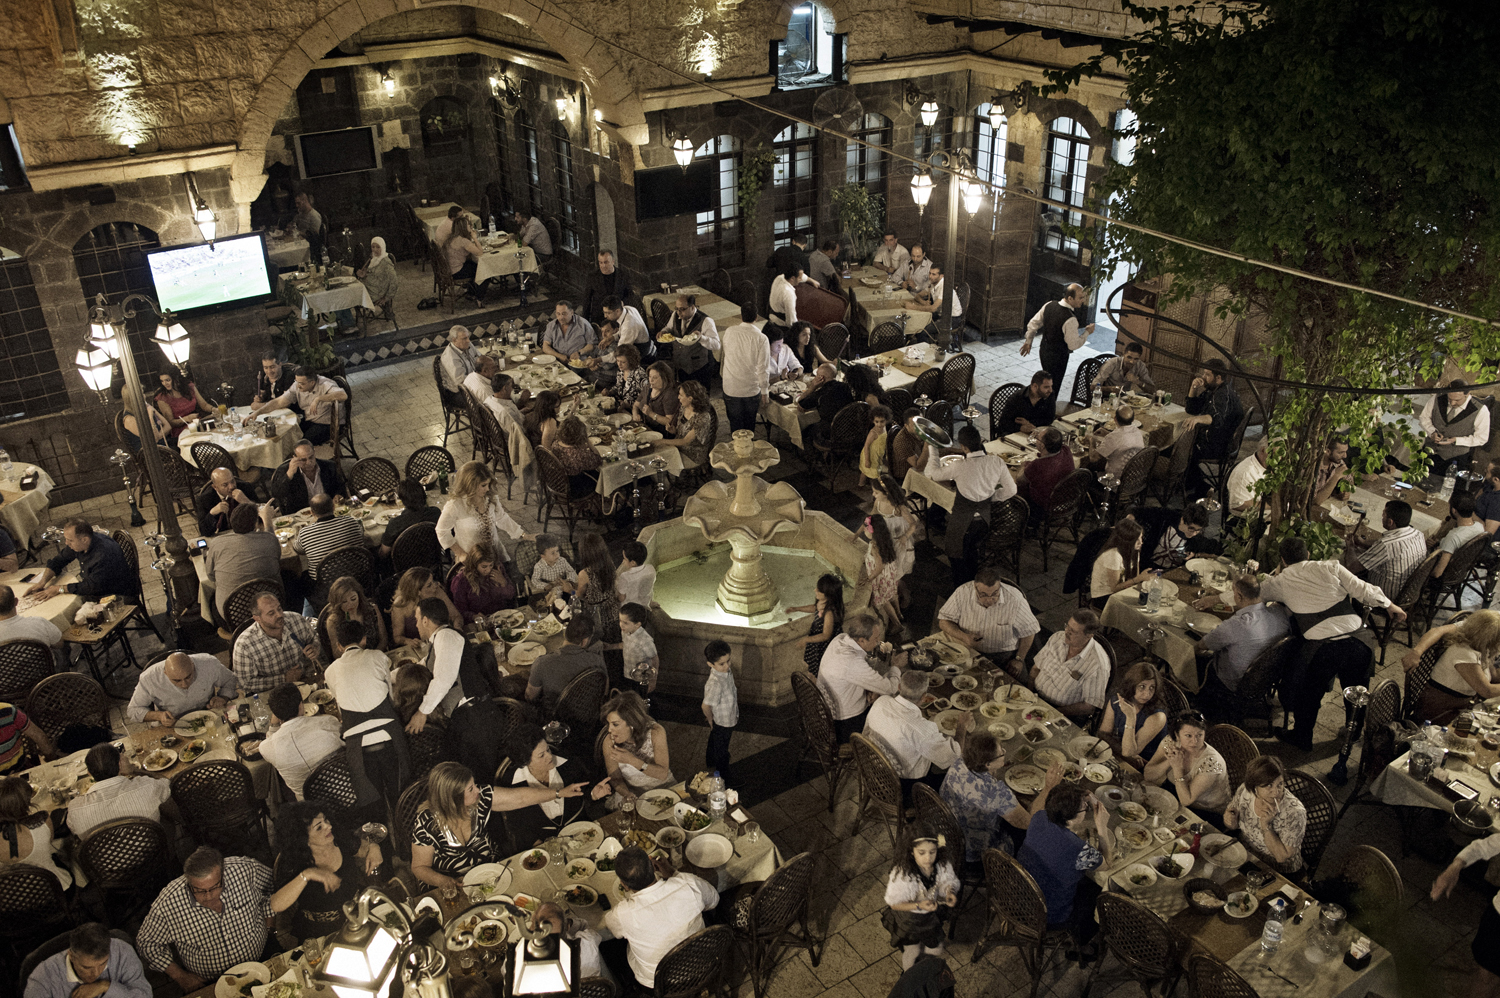 Eating out in the Old City in Damascus, May 18, 2014.